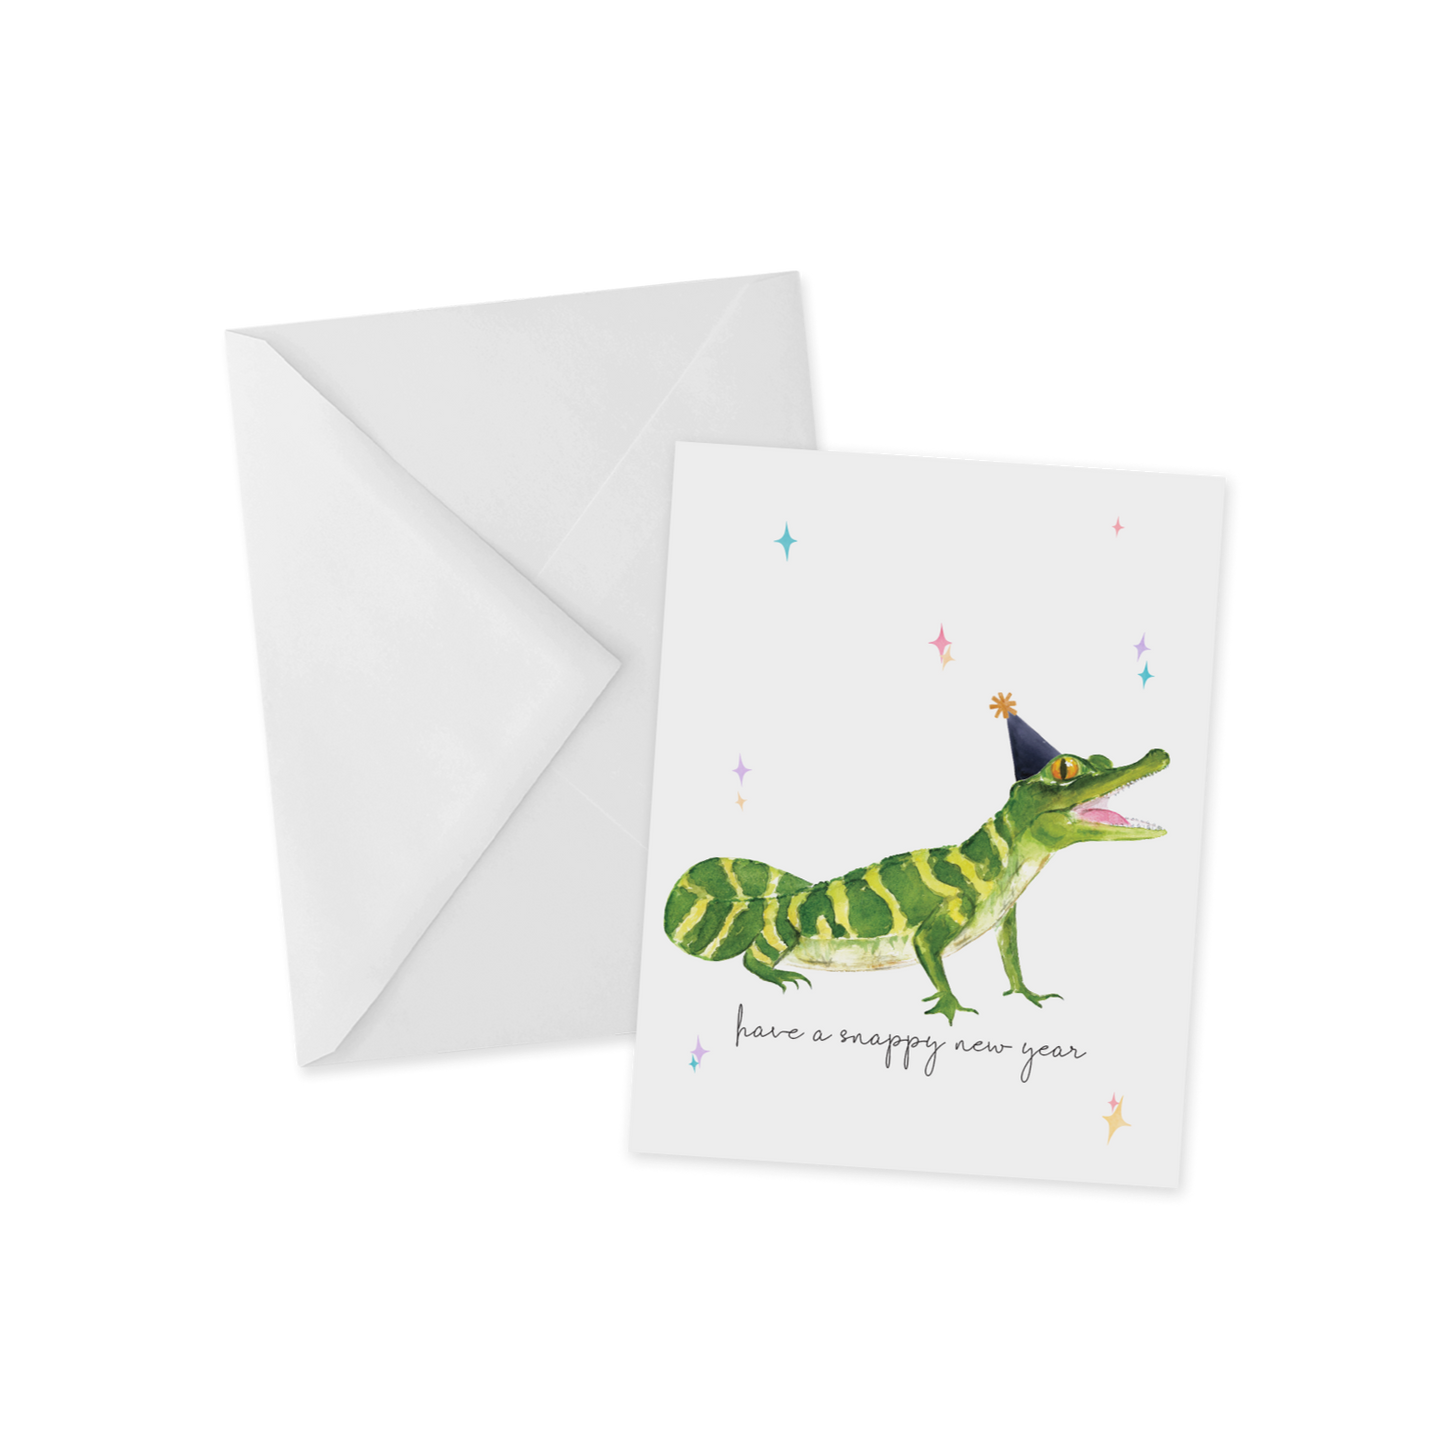 Snappy New Year, Party Gator Greeting Card